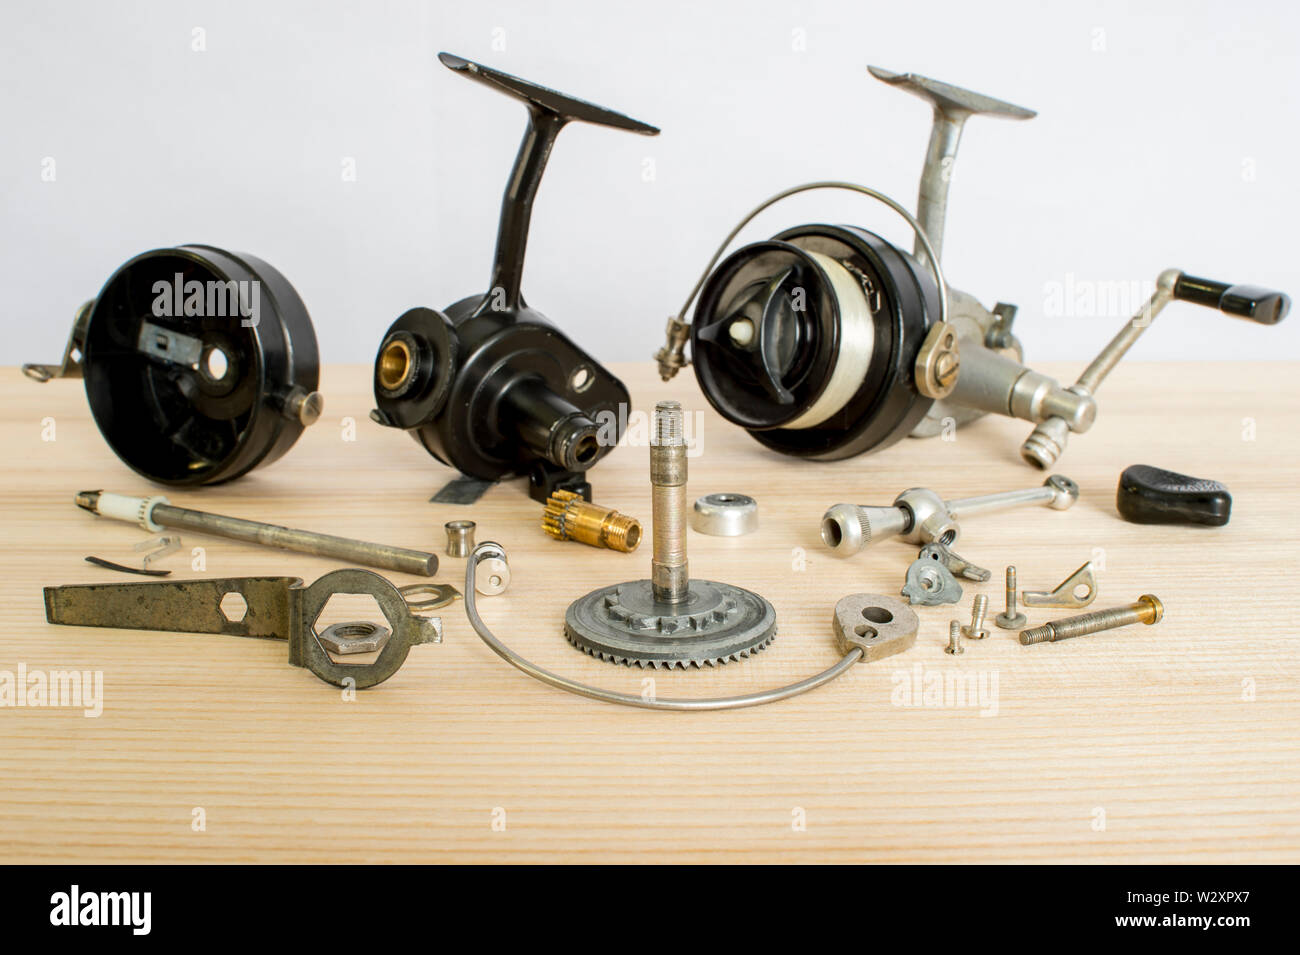 https://c8.alamy.com/comp/W2XPX7/a-fishing-spinning-reel-as-a-whole-and-a-second-similar-completely-disassembled-concept-parts-of-a-whole-W2XPX7.jpg